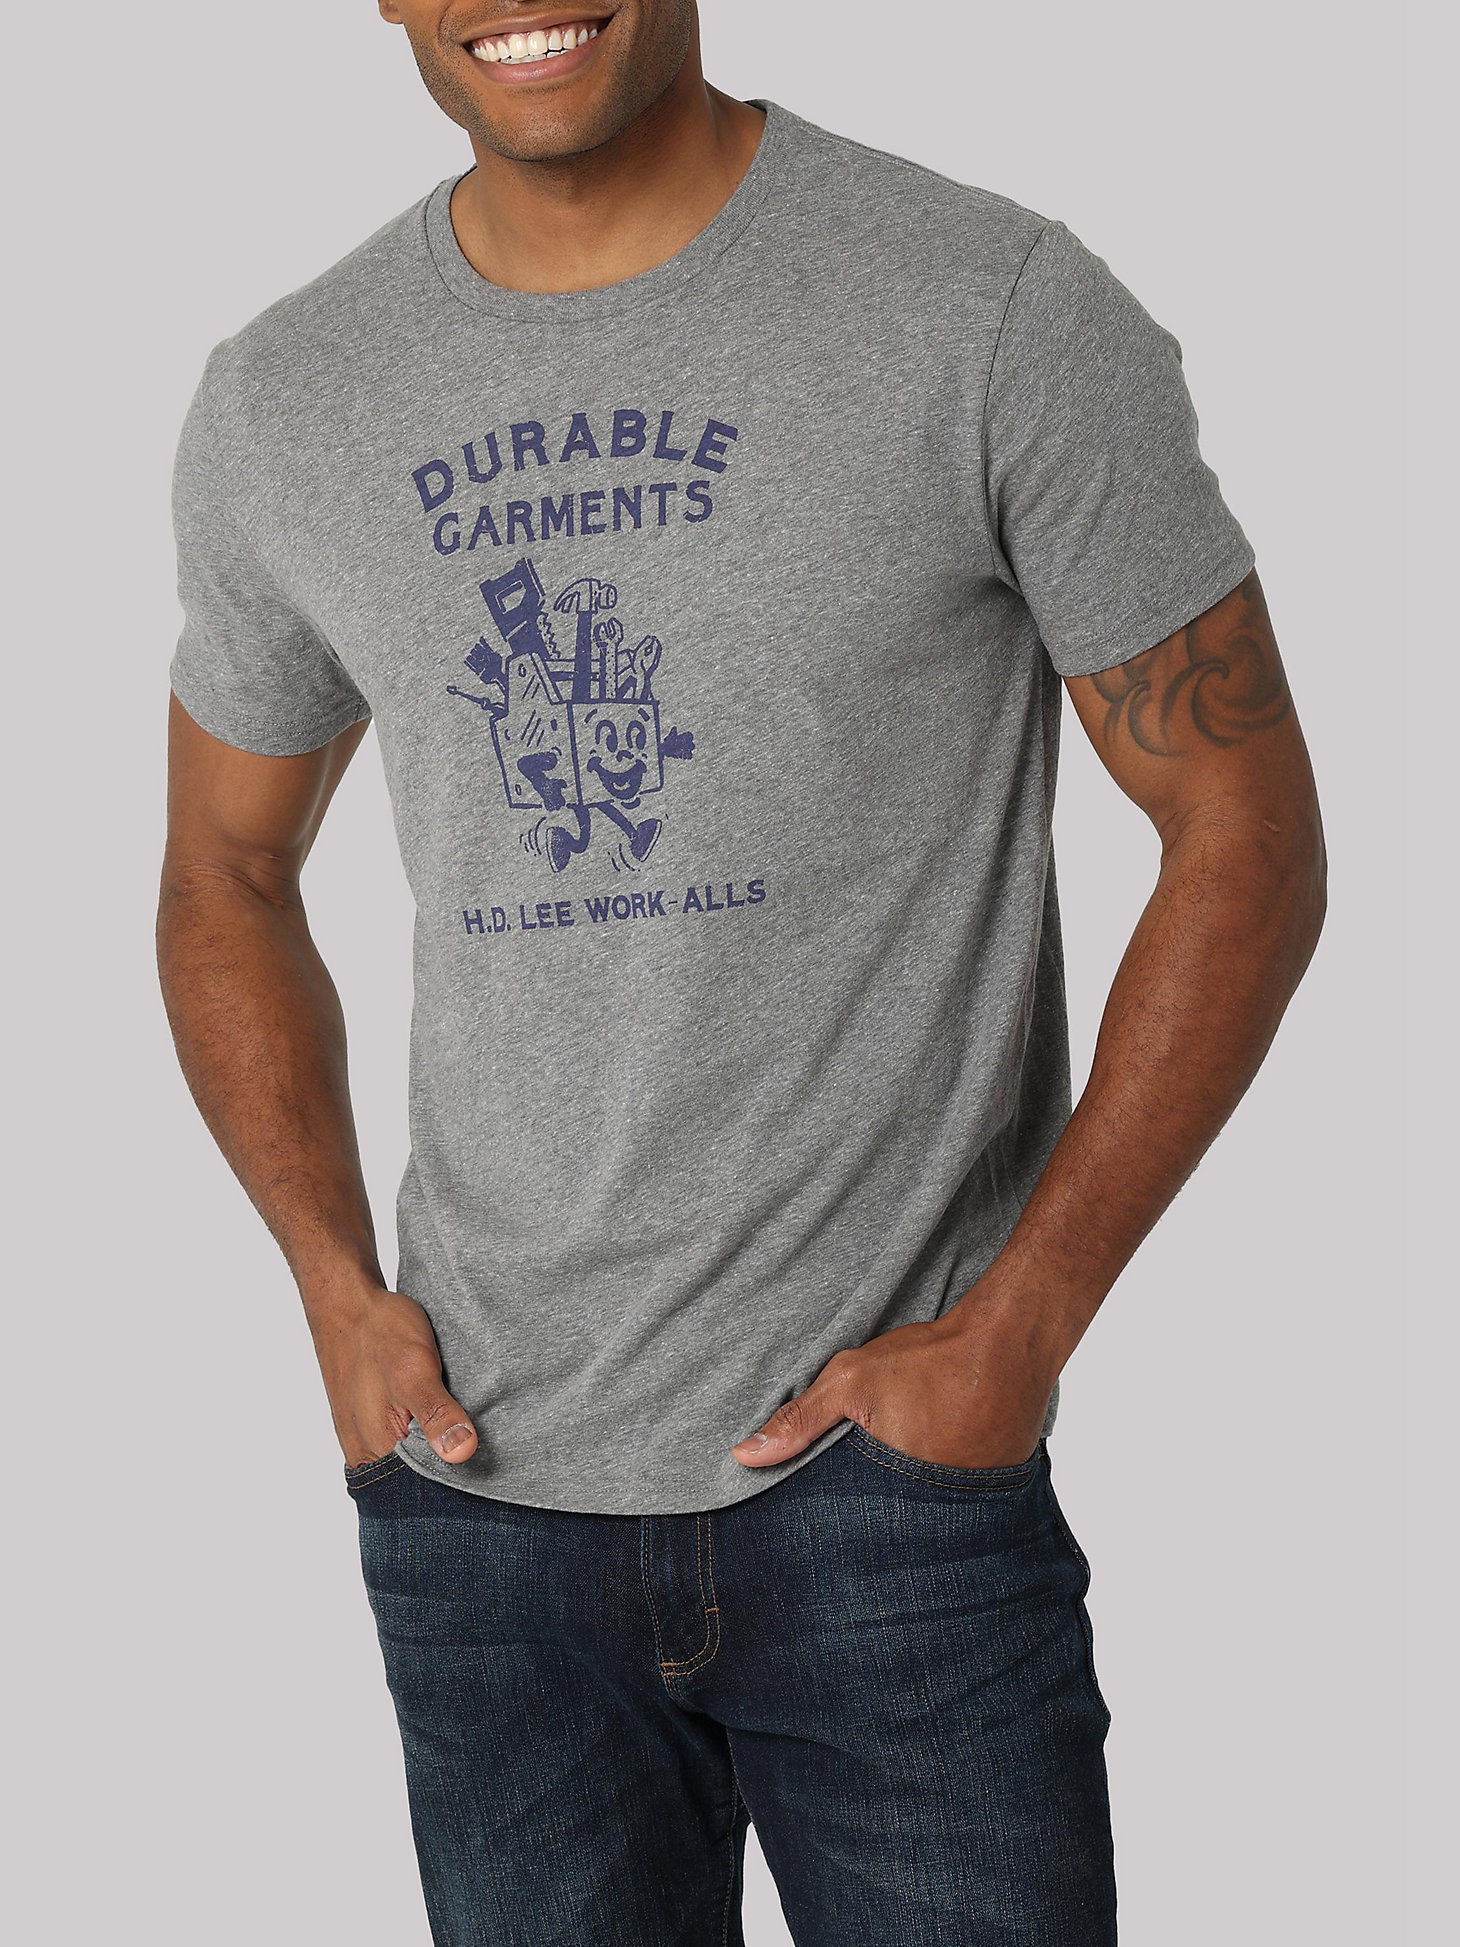 Men's Lee Durable Garments Graphic Tee in Graphite Heather main view